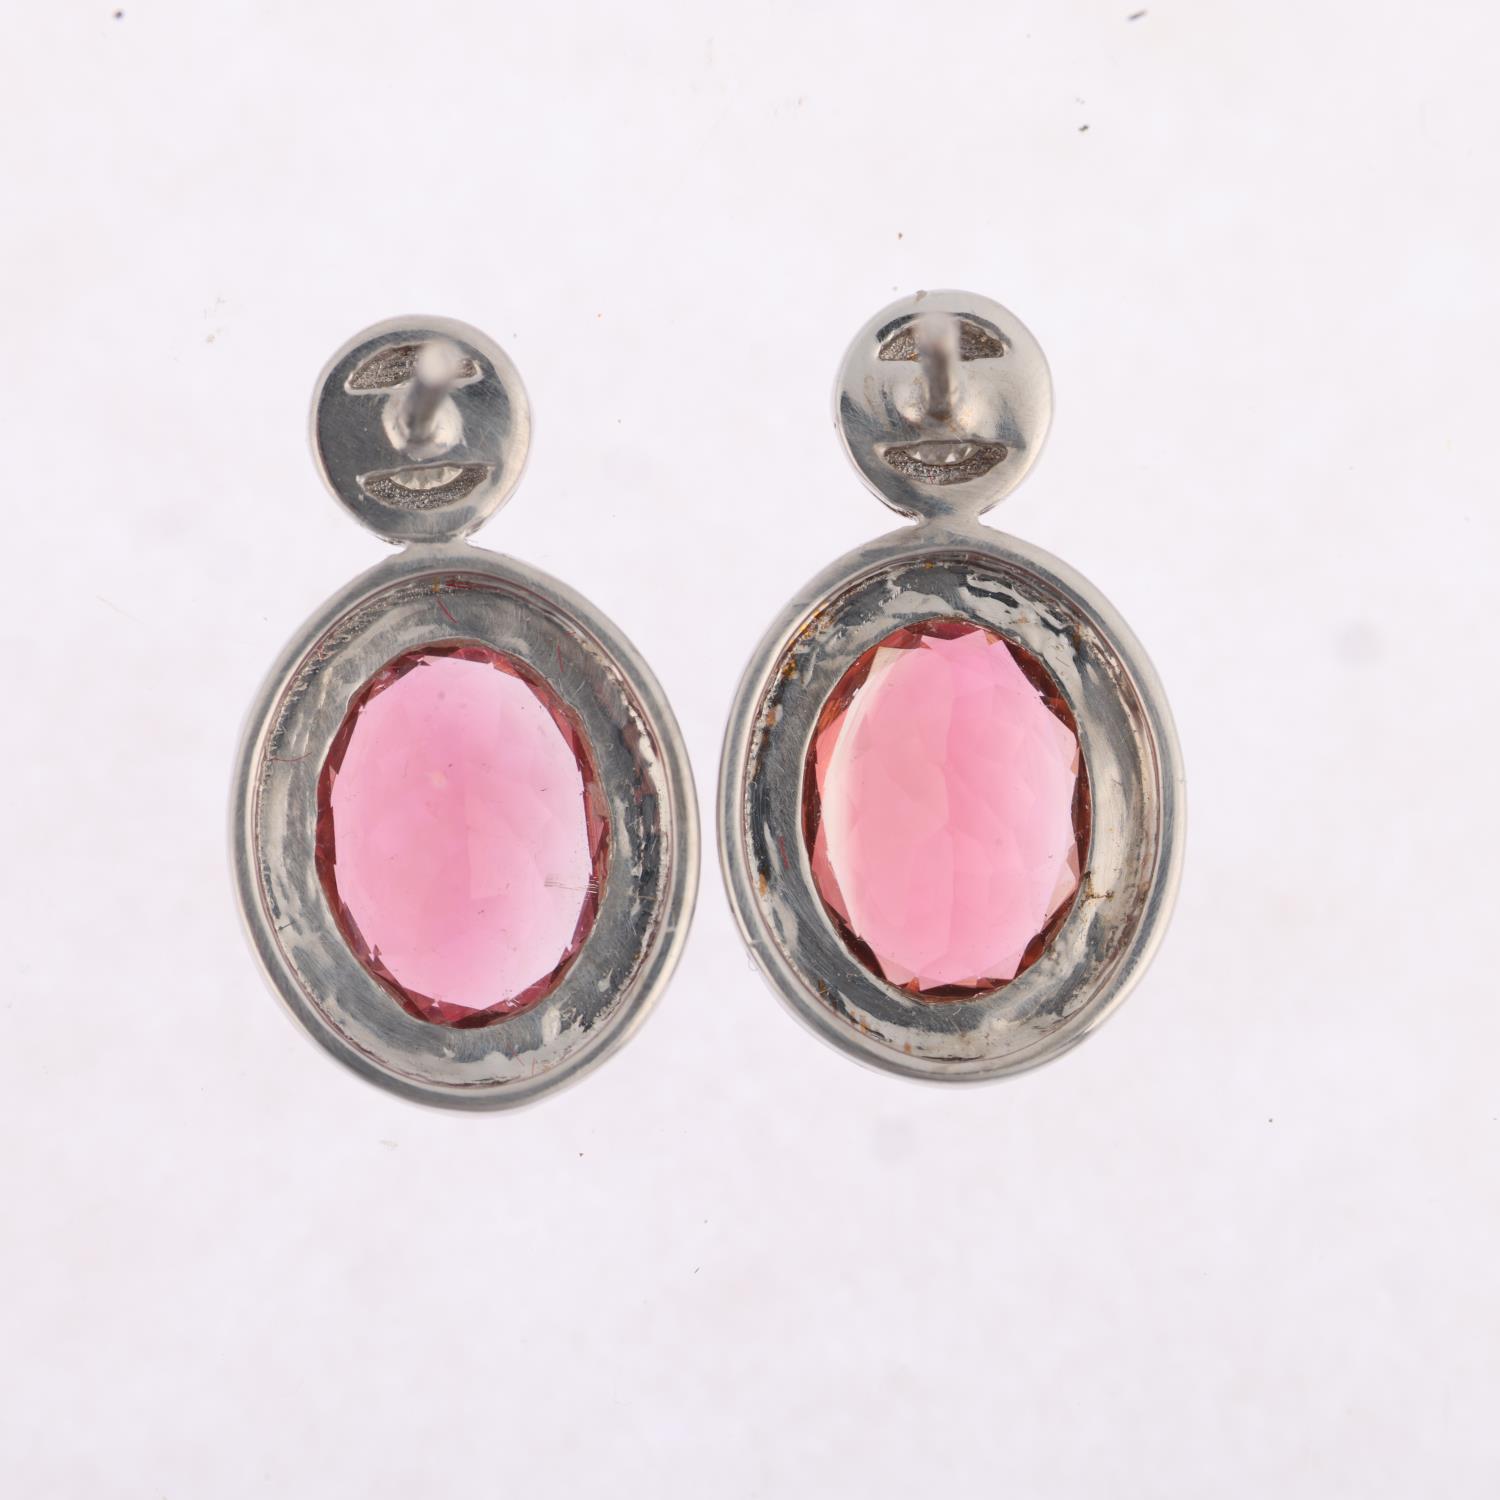 A pair of 18ct white gold pink tourmaline and diamond earrings, maker M&A, London 2018, rub-over set - Image 2 of 4